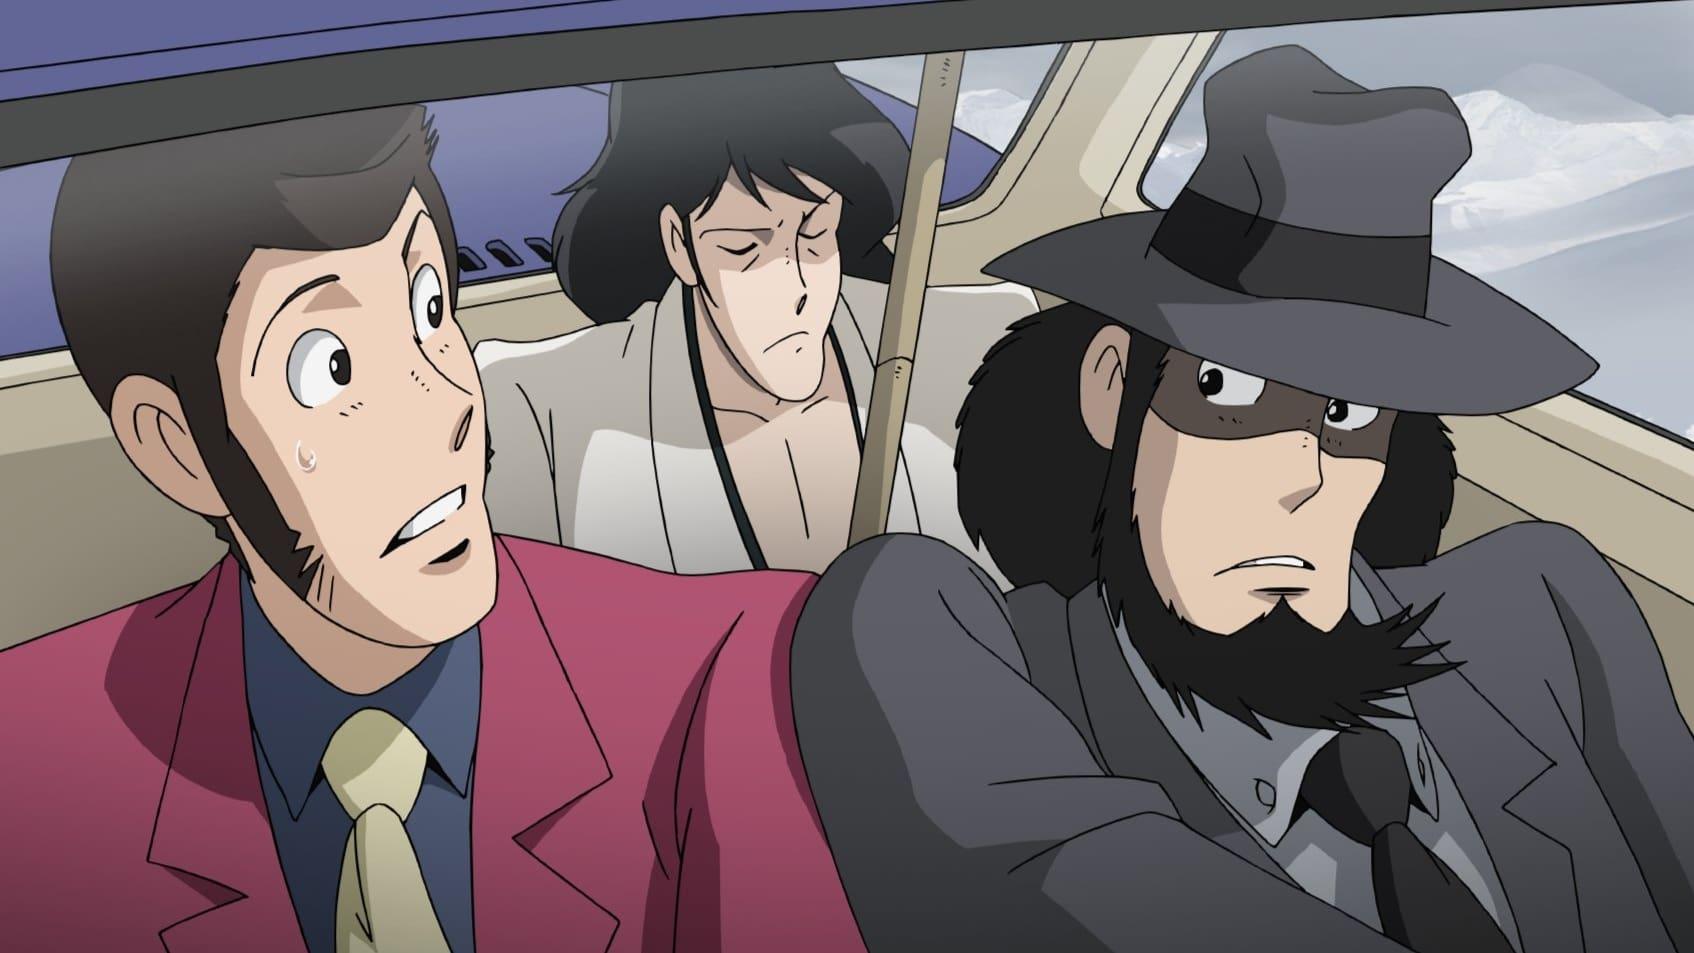 Lupin the Third: The Last Job backdrop